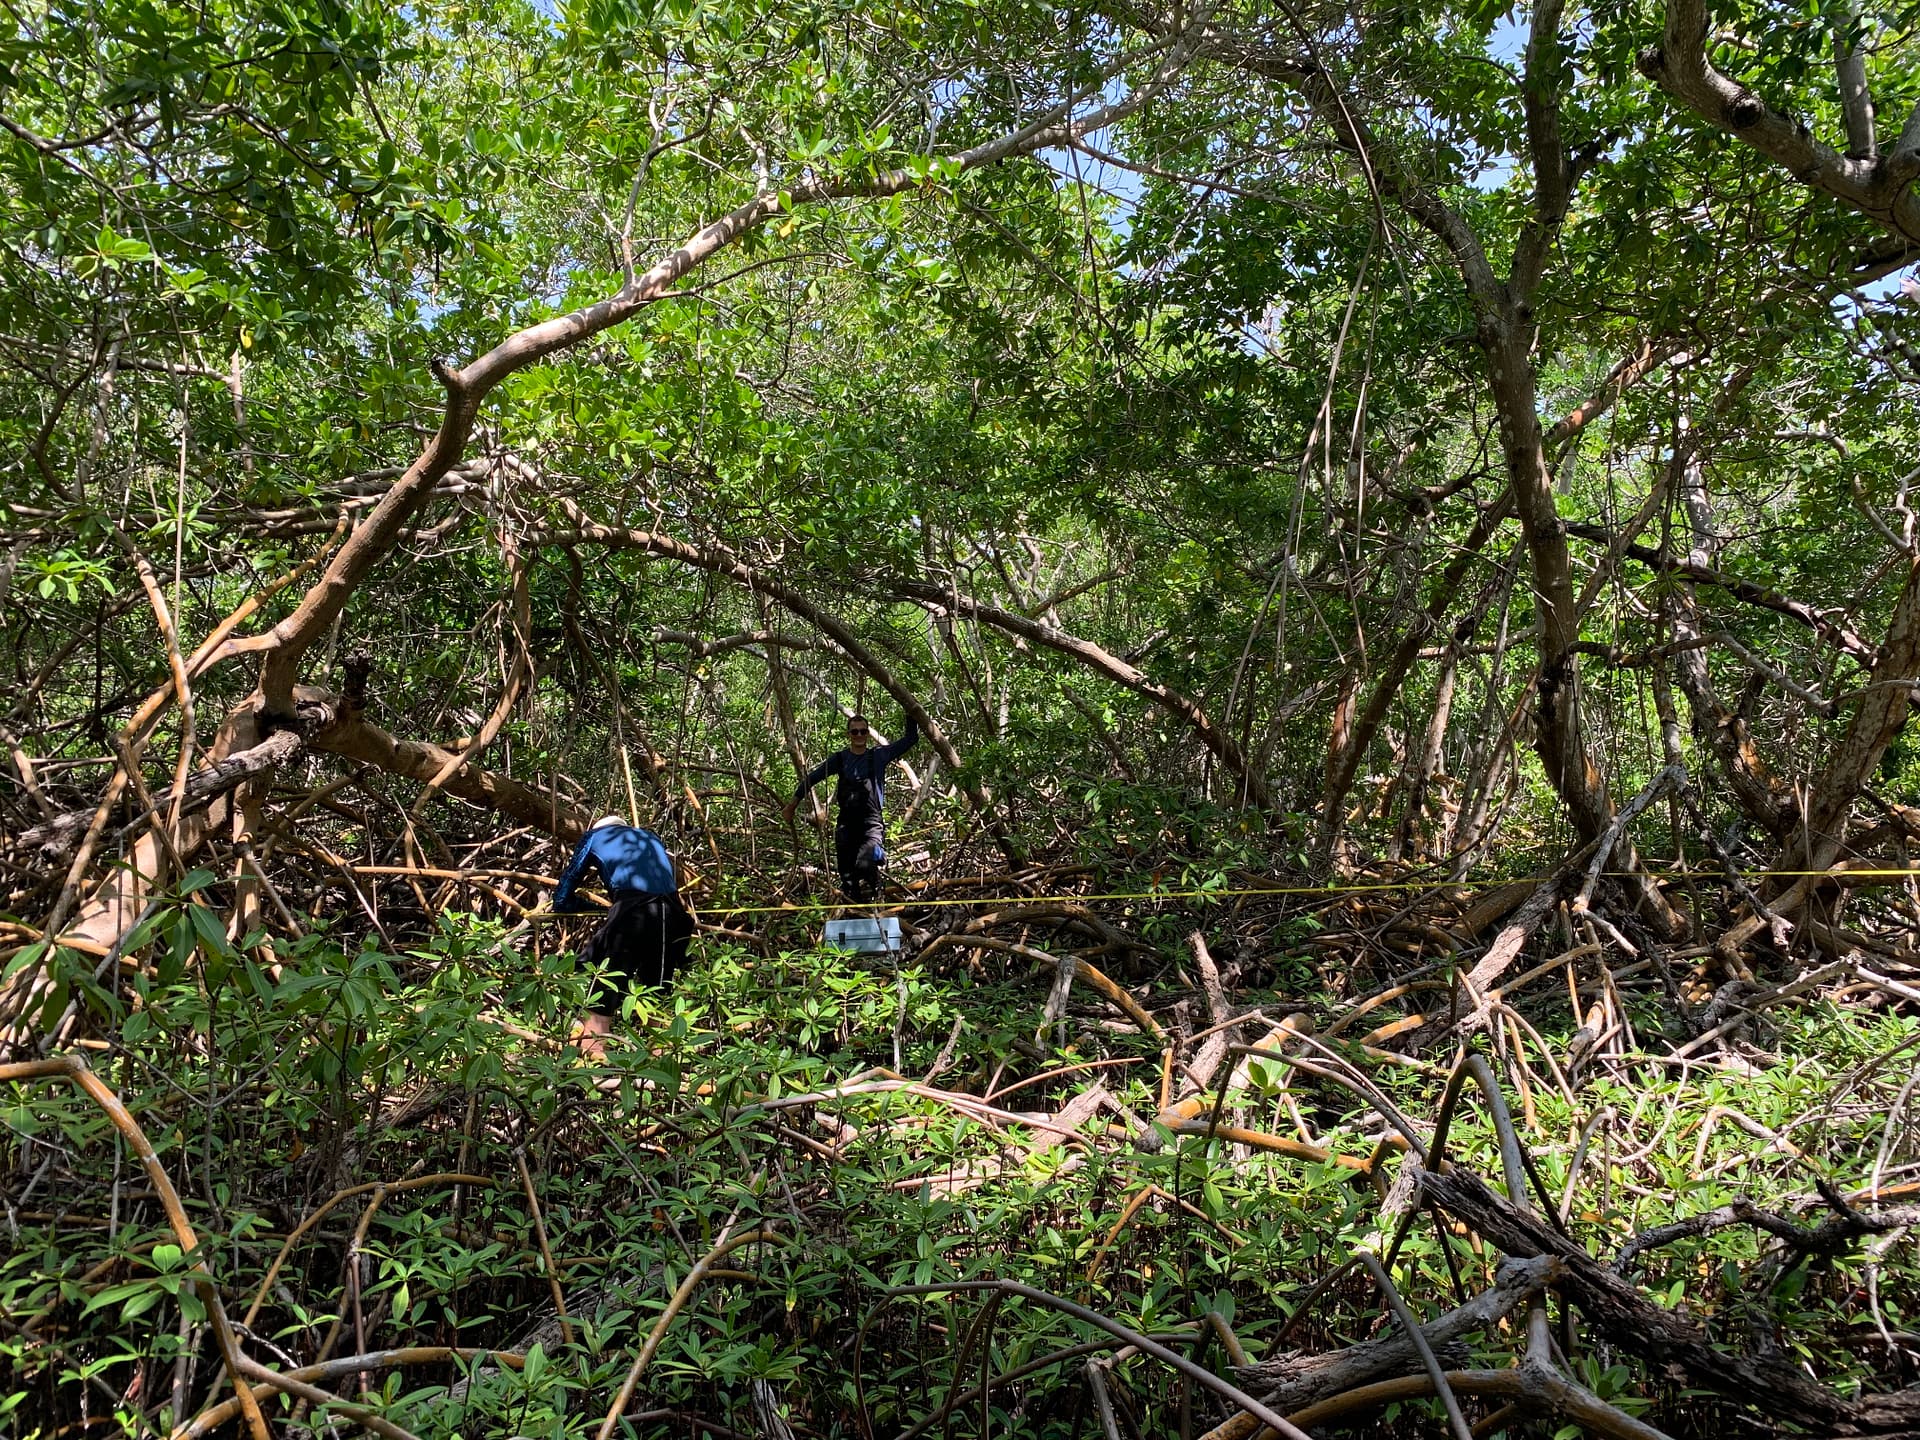 Sharing 40 years’ experience of working on mangroves – the generous forests of the tidal zone